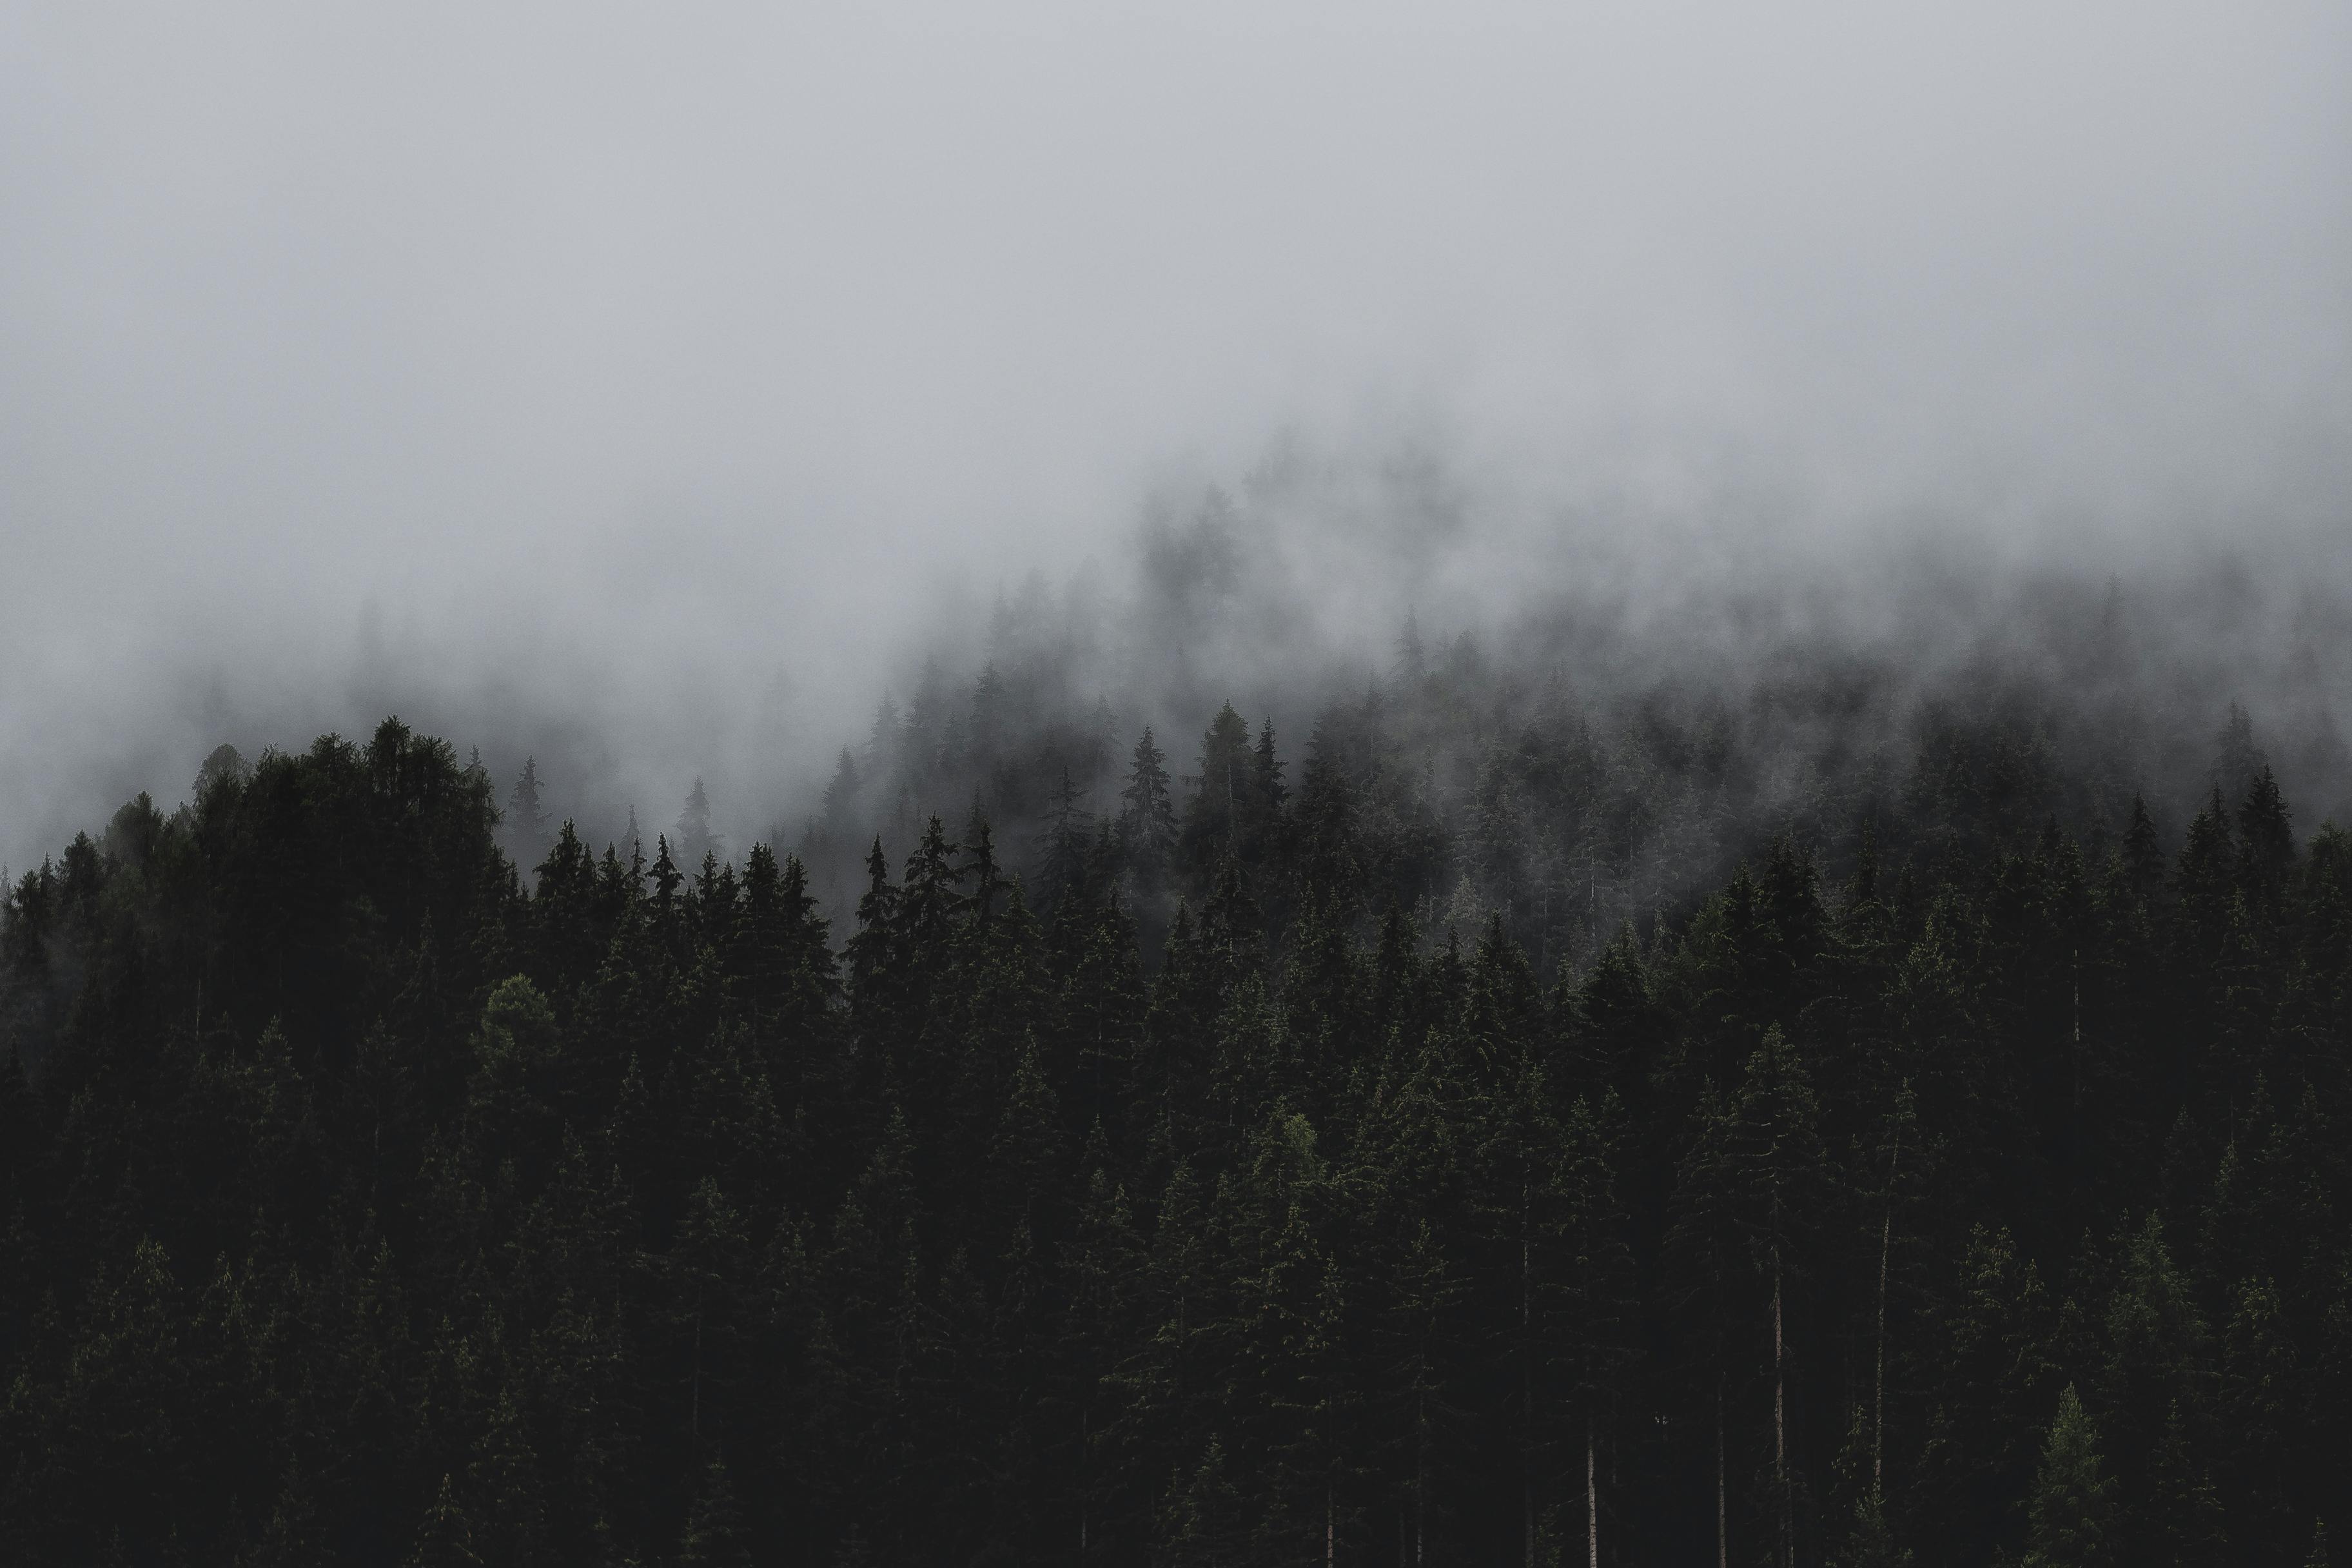 500 Dark Forest Pictures HD  Download Free Images on Unsplash